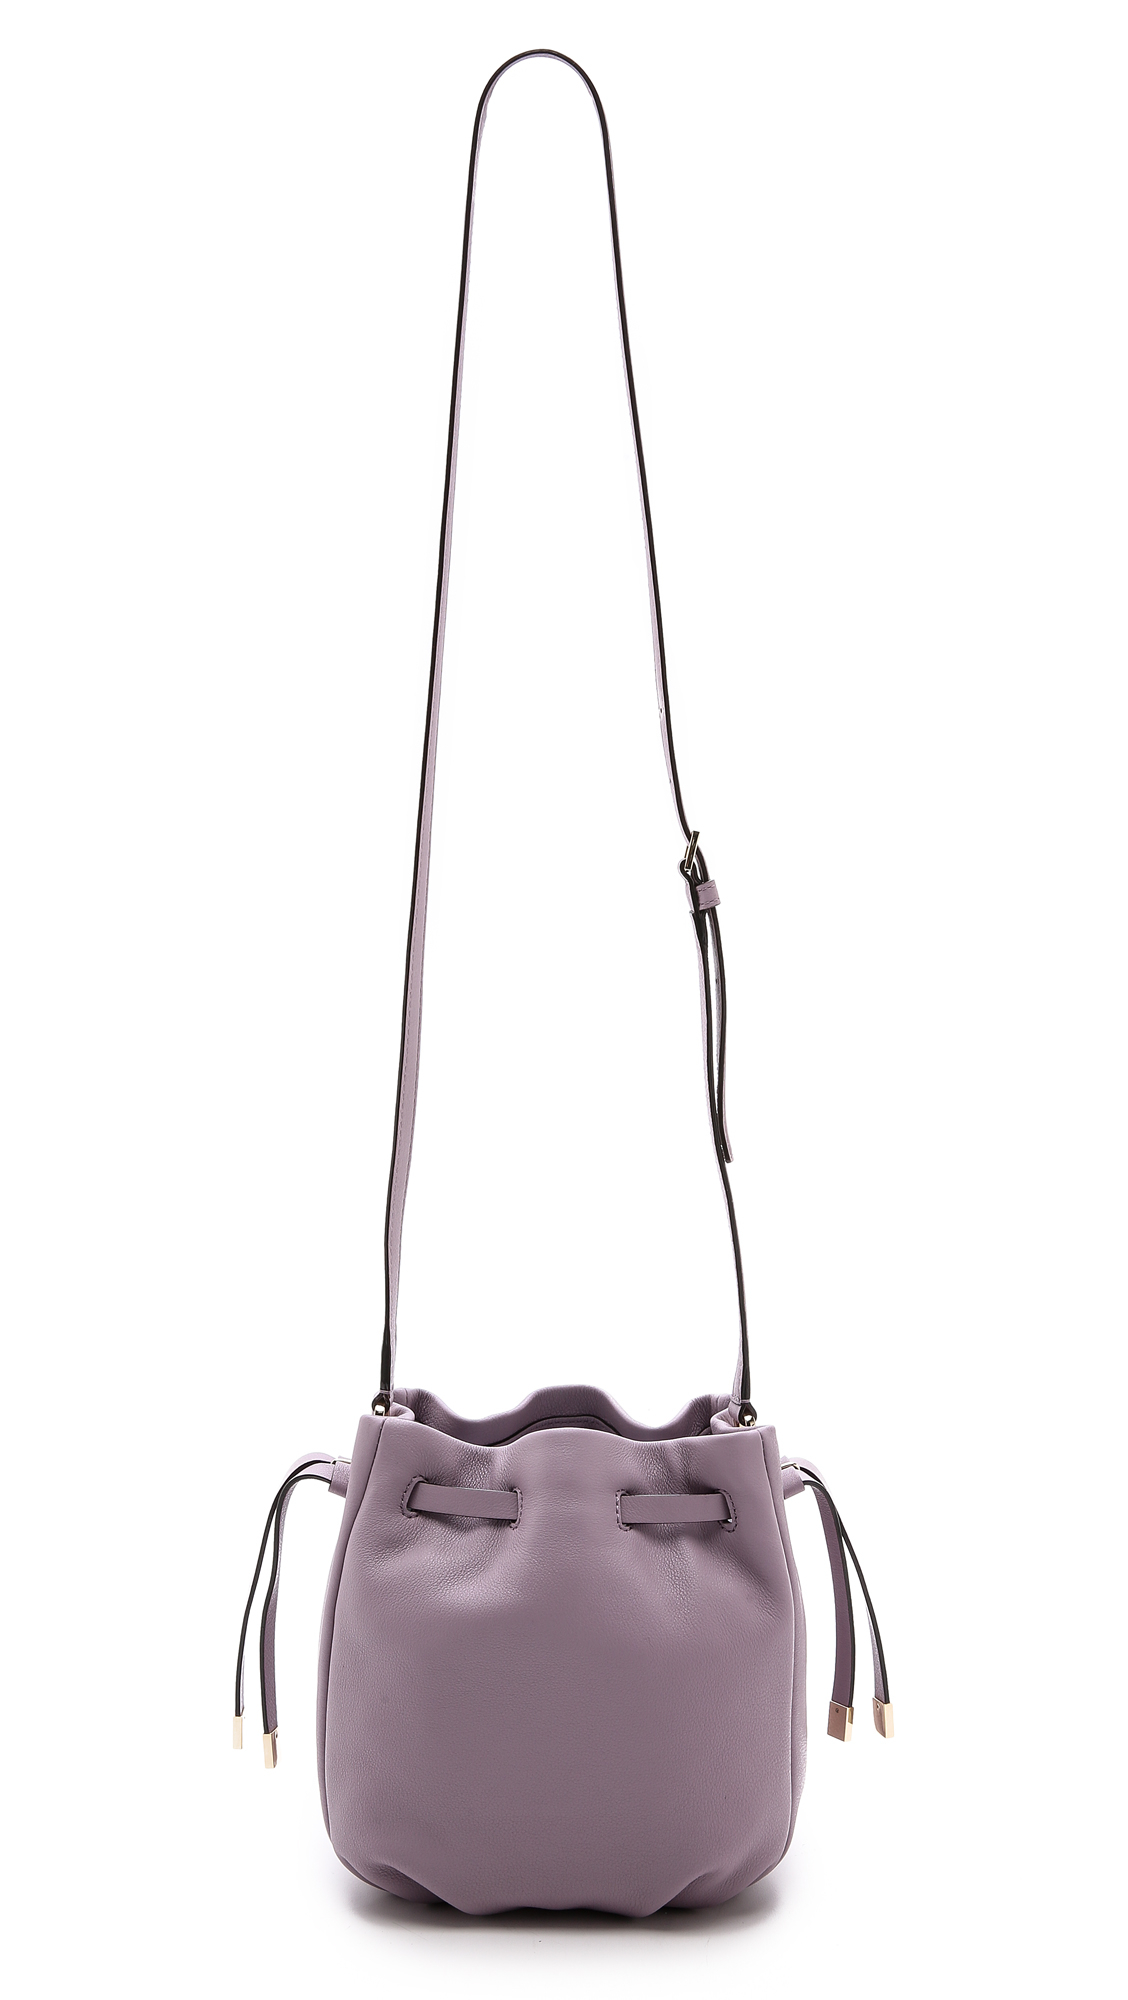 Kate spade Kacey Lane Small Poppy Bucket Bag - Lilac Bliss in Pink (Lilac Bliss) | Lyst